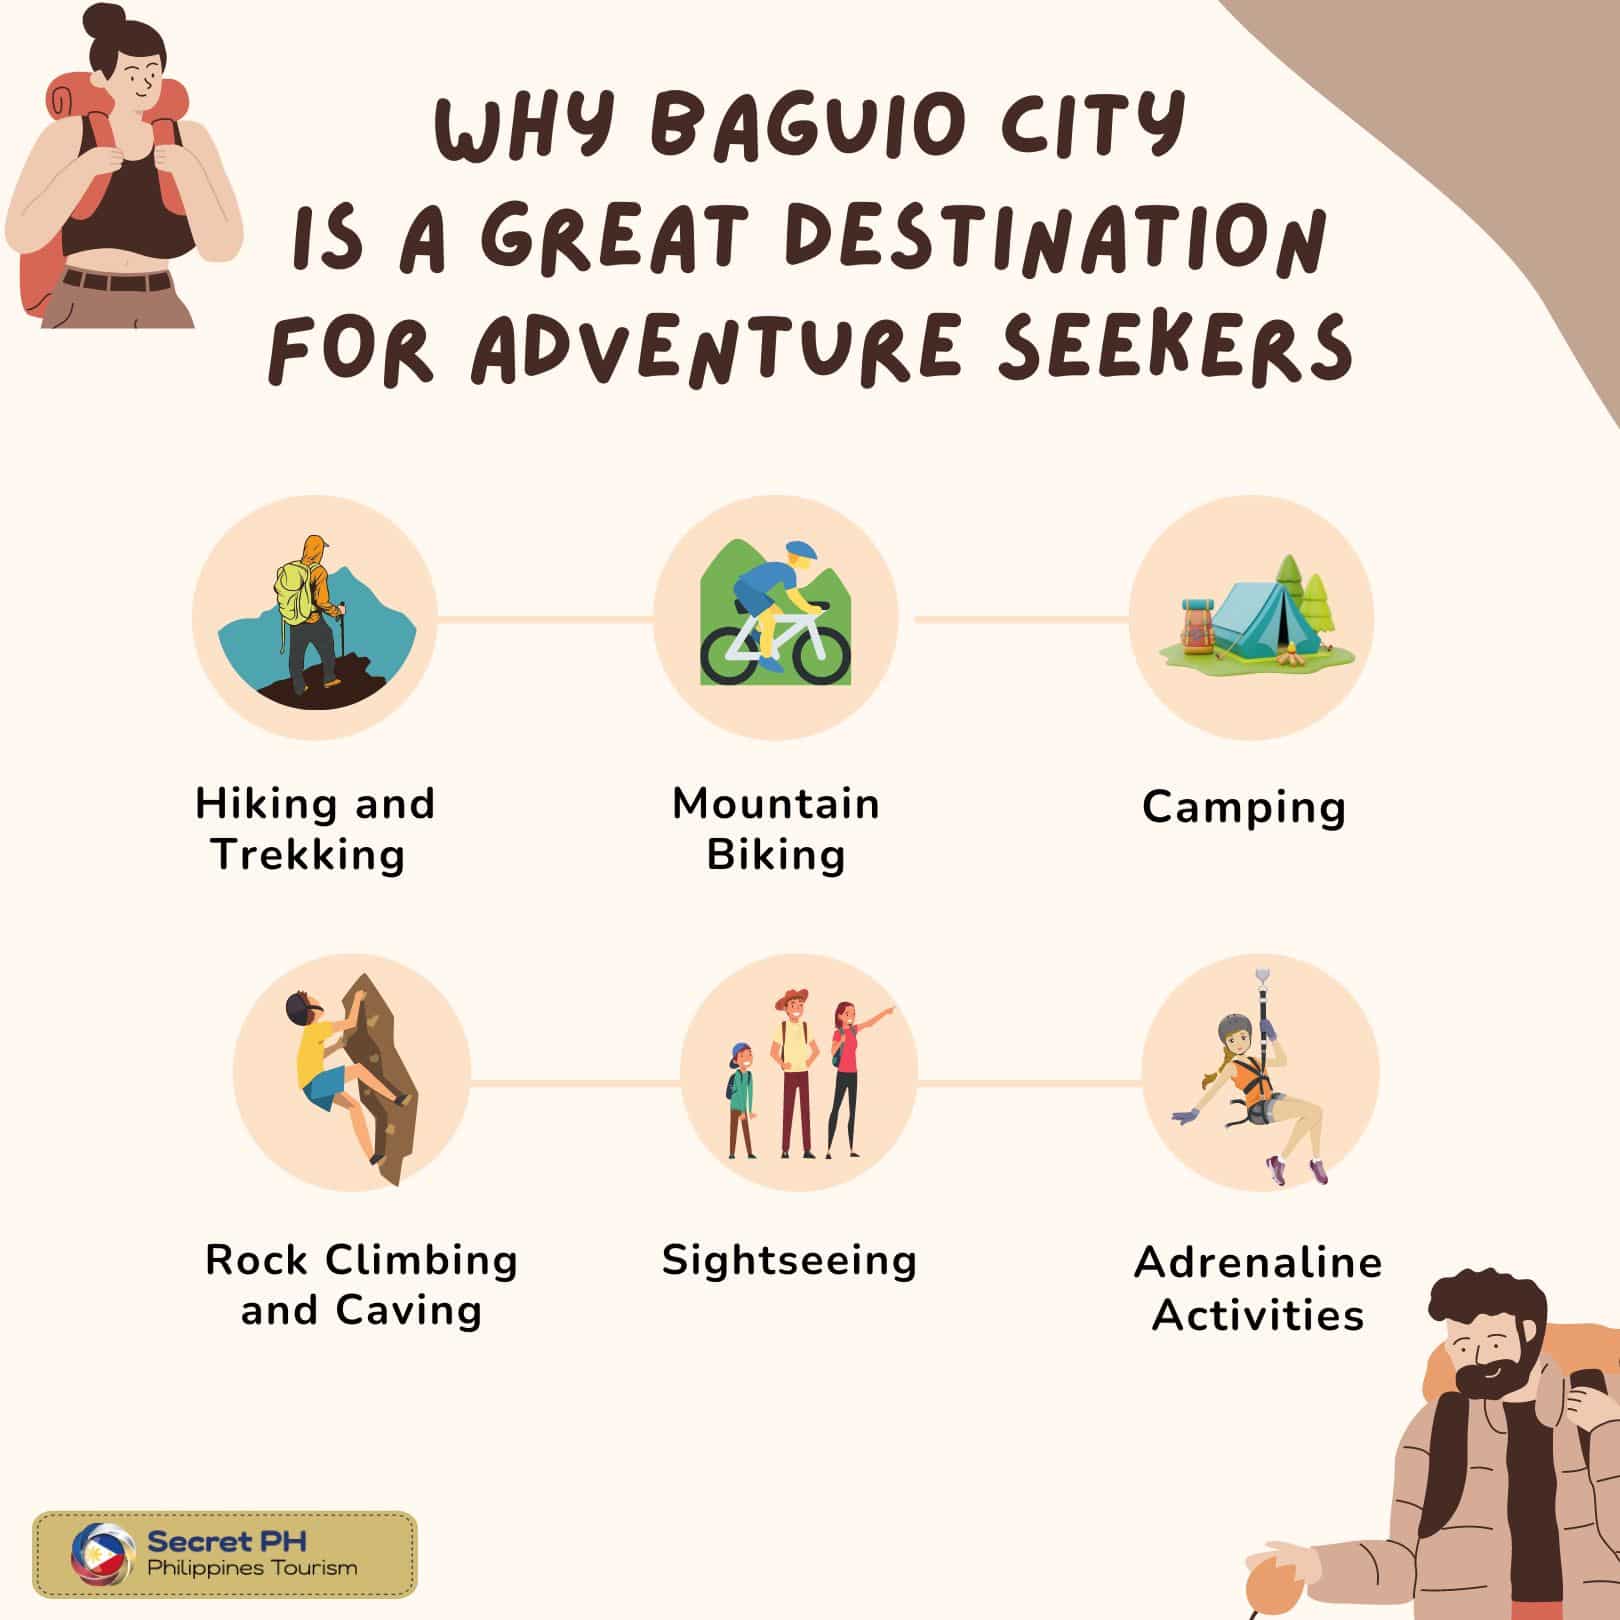 Why Baguio City is a Great Destination for Adventure Seekers